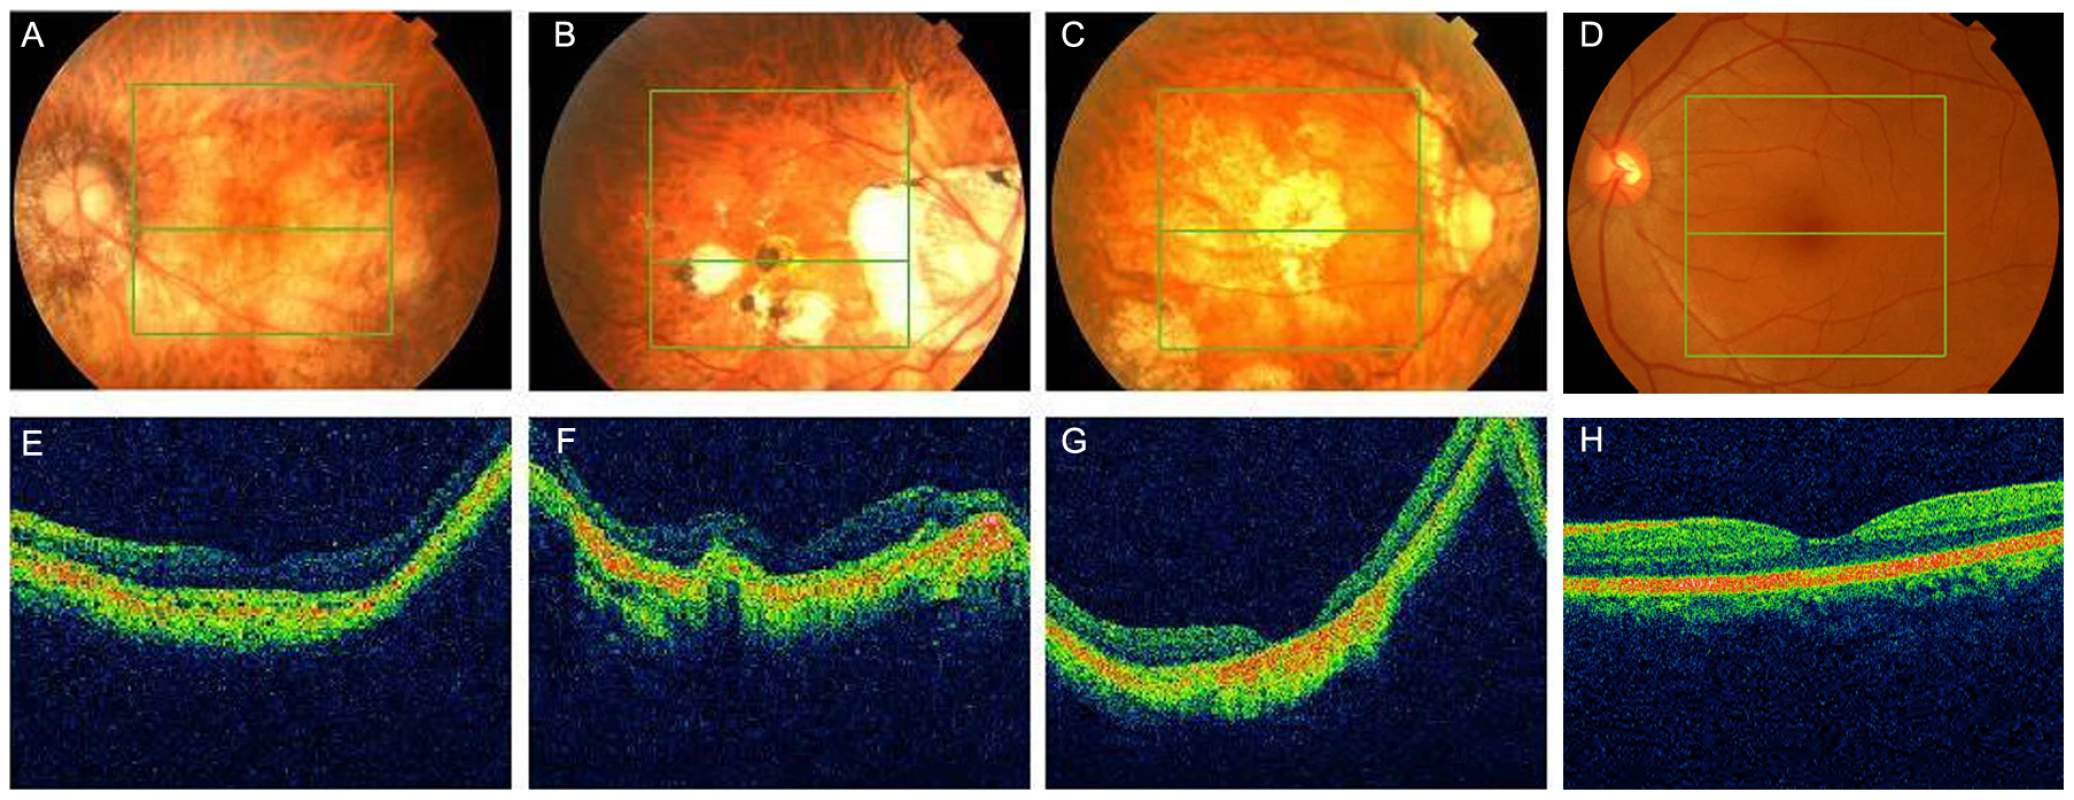 Fundus photographs and optical coherence tomography (OCT) of high myopia patients from the sporadic cases.